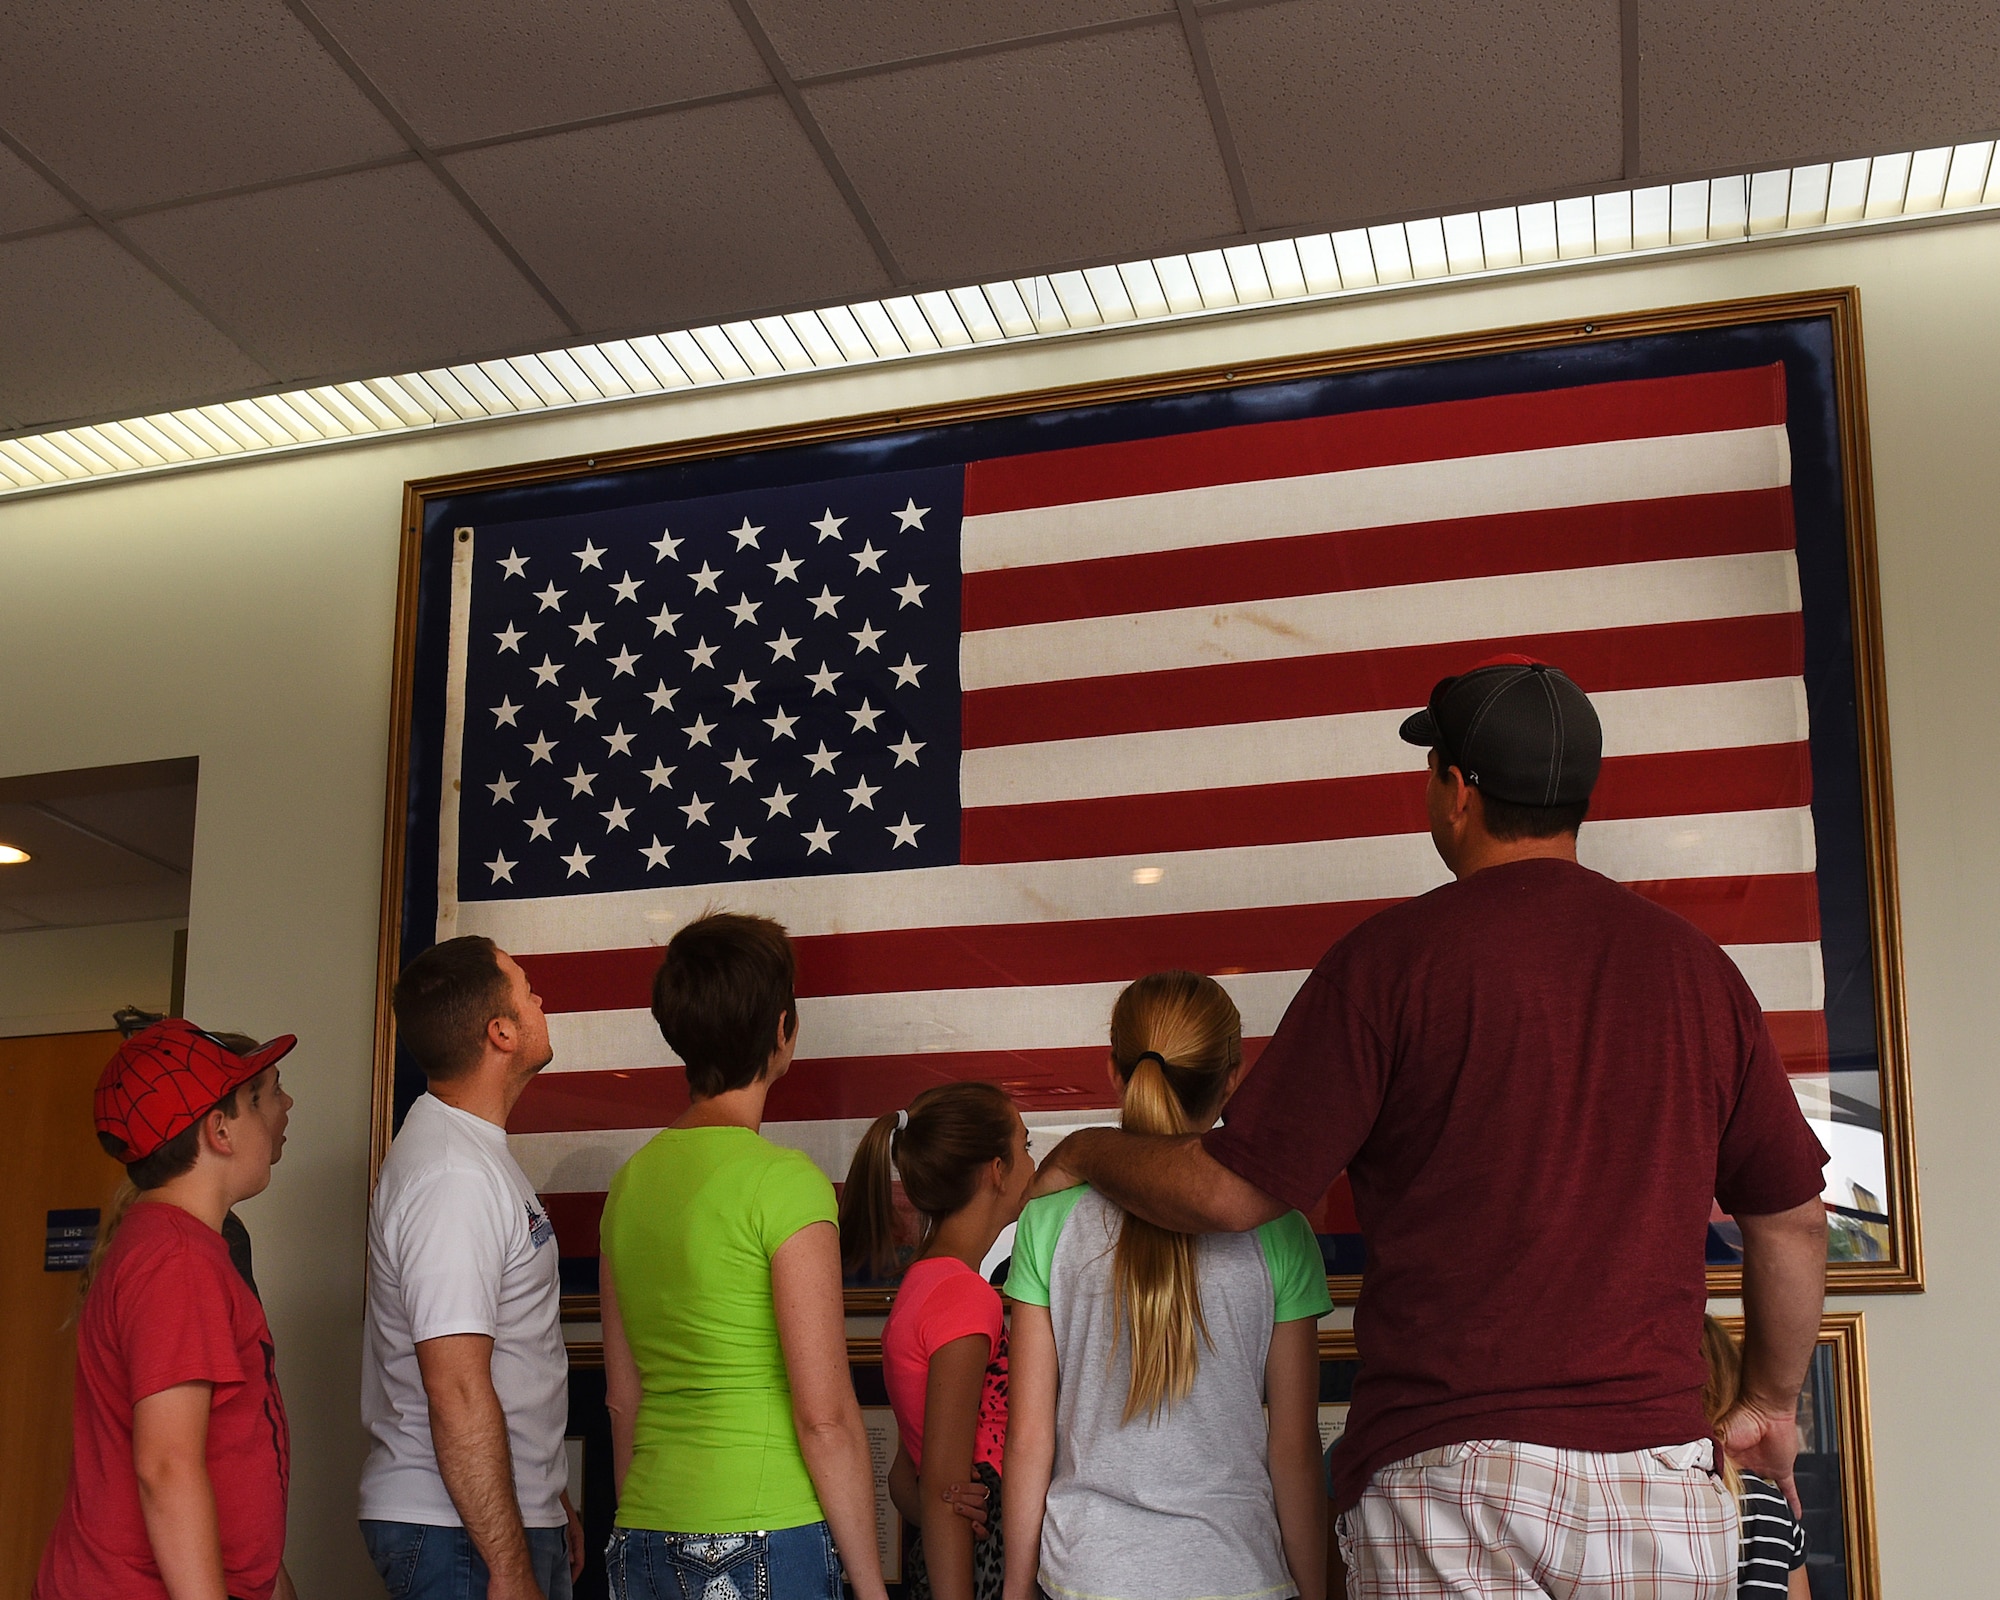 Master Sgt. Kelly K. Collett, broadcast manager, thrid from left, and his family take a tour of the TEC TV studios June 6, 2016, at the I.G. Brown Training and Education Center in Louisville, Tenn., to include the American flag display in Spruance Hall. The flag was last flown on campus July 29, 1986, after a 16-year journey over the capitols of every state and territory in the United States. (U.S. Air National Guard  photo by Master sgt. Mike R. Smith/released)  